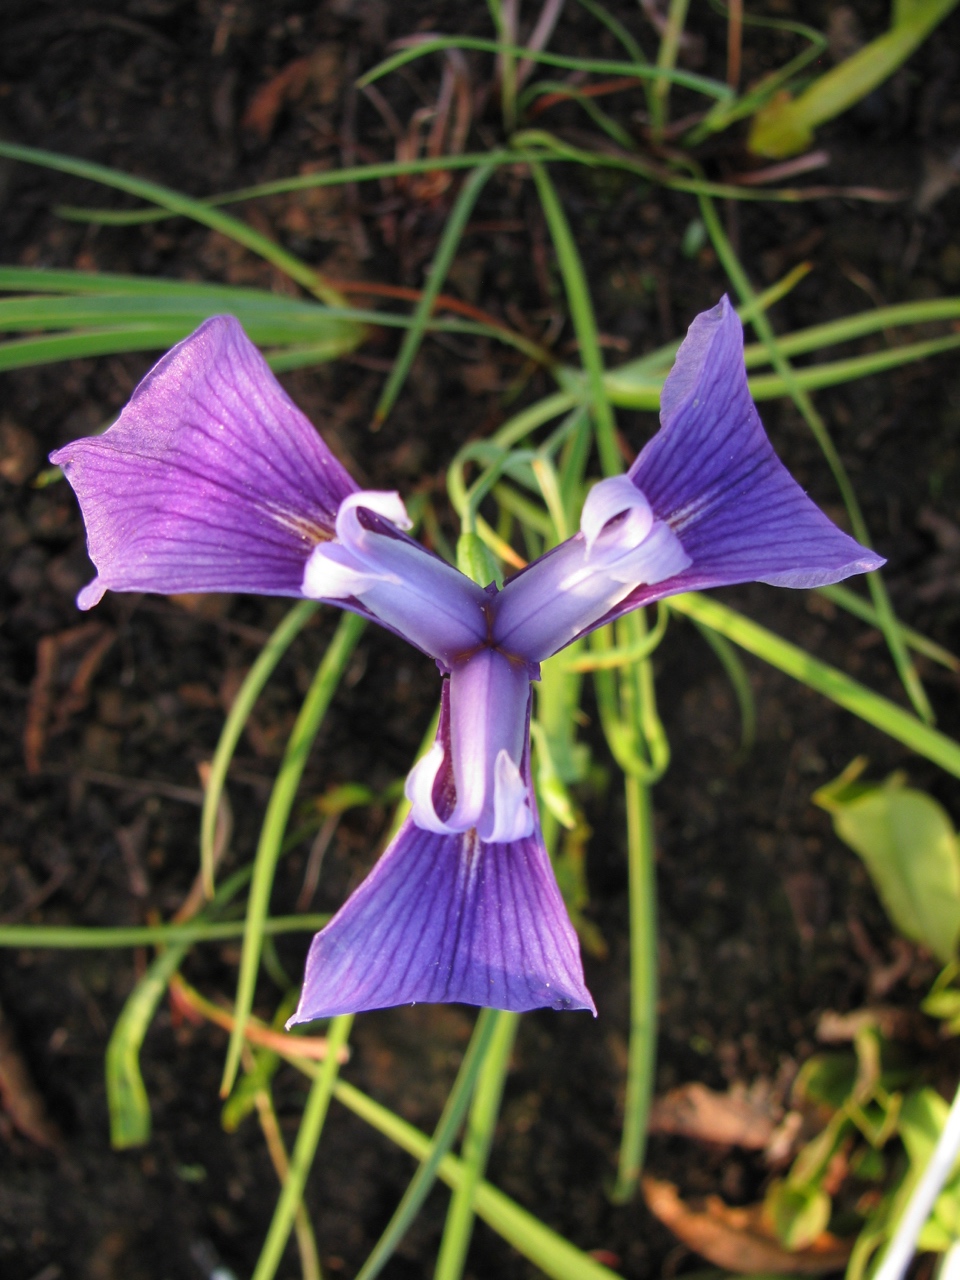 The Scientific Name is Iris tridentata. You will likely hear them called Savanna Iris. This picture shows the Top view of flower. Notice the presence of the sepals, petaloid style branches, but no visible petals. The petals are present but very much reduced in size. of Iris tridentata